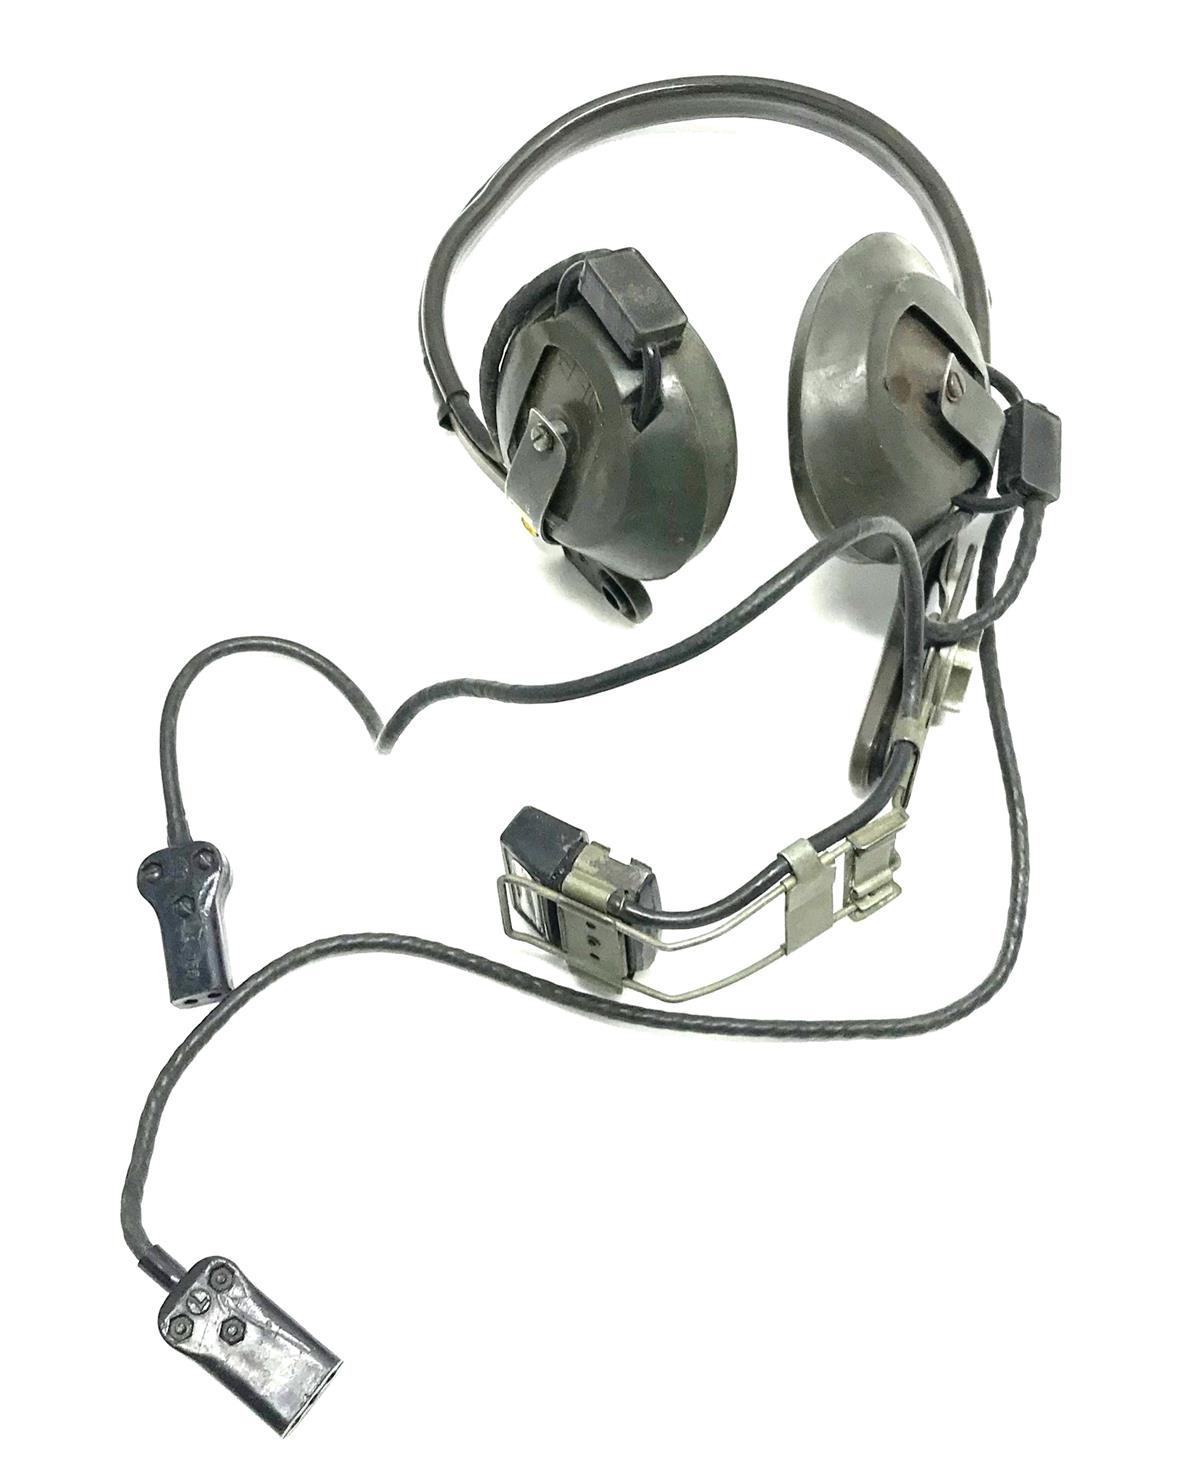 SP-2250 | SP-2250  ANGSA-6C Chest Set Group With Headset Microphone and Handset with U-77U Connector  (12).JPG